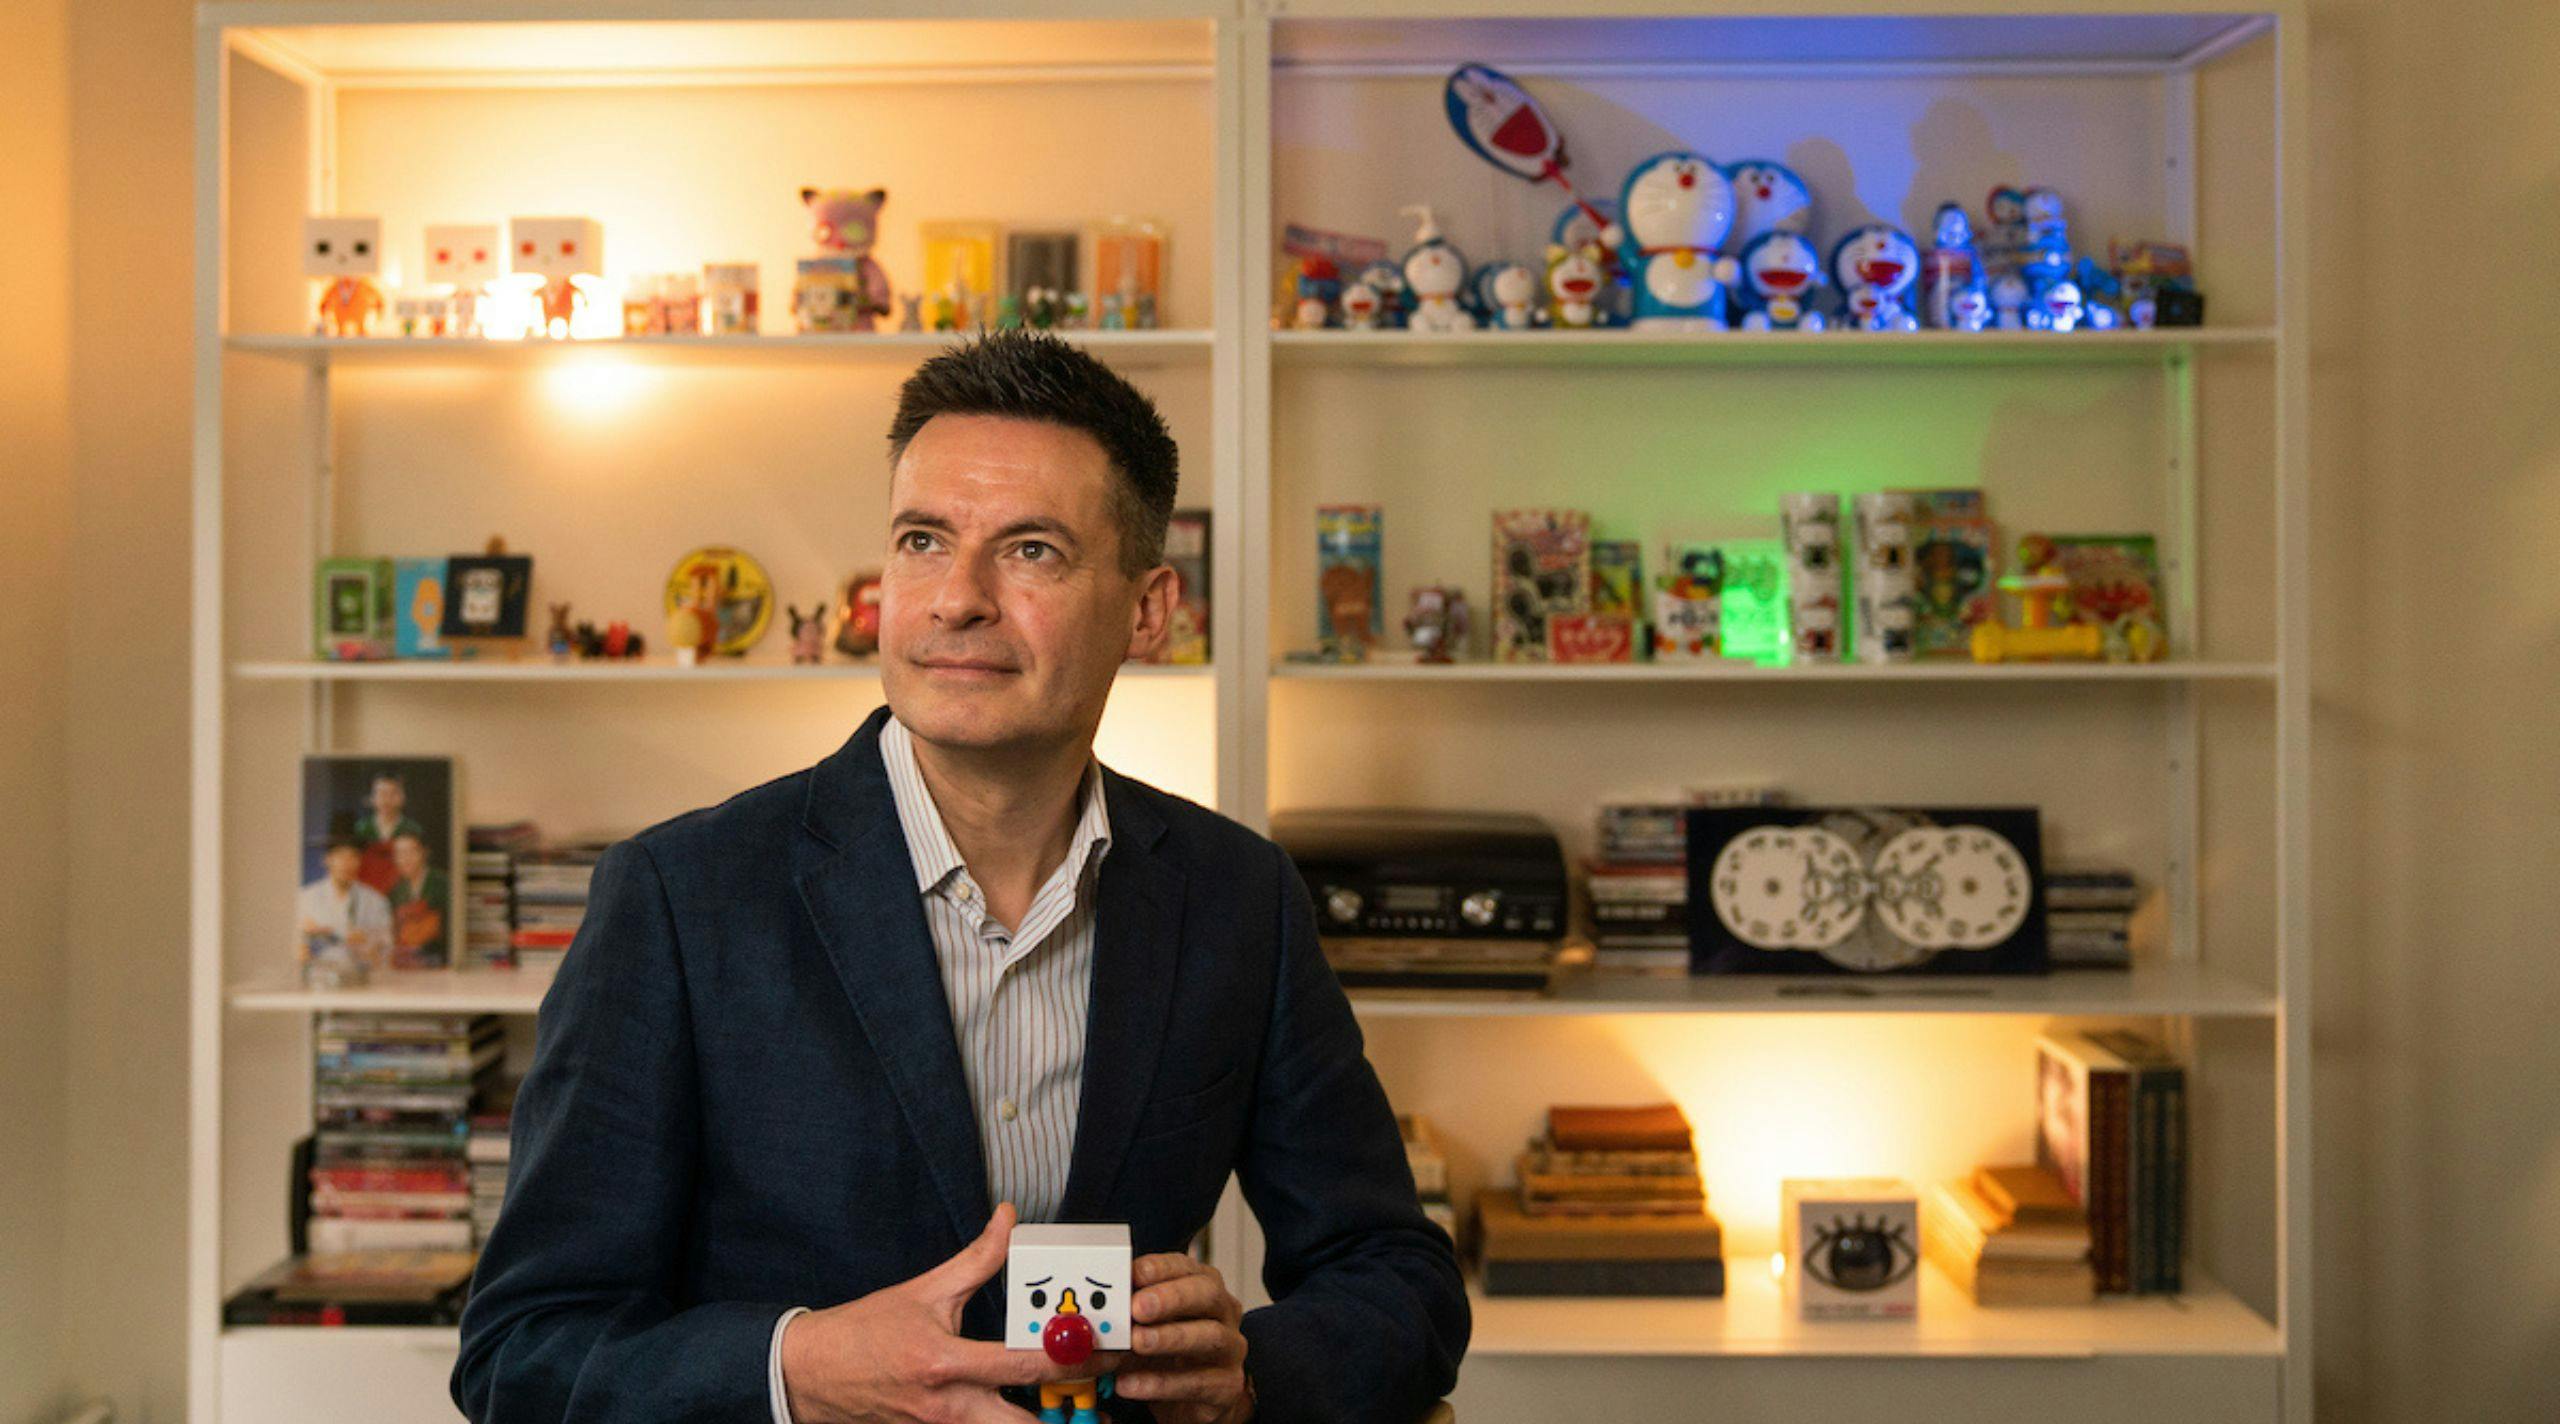 Roald Maliangkay in his office, he is holding a toy that looks like tofu. Behind him are shelves filled with designer toys, with many different versions of the blue robot cat Doraemon.